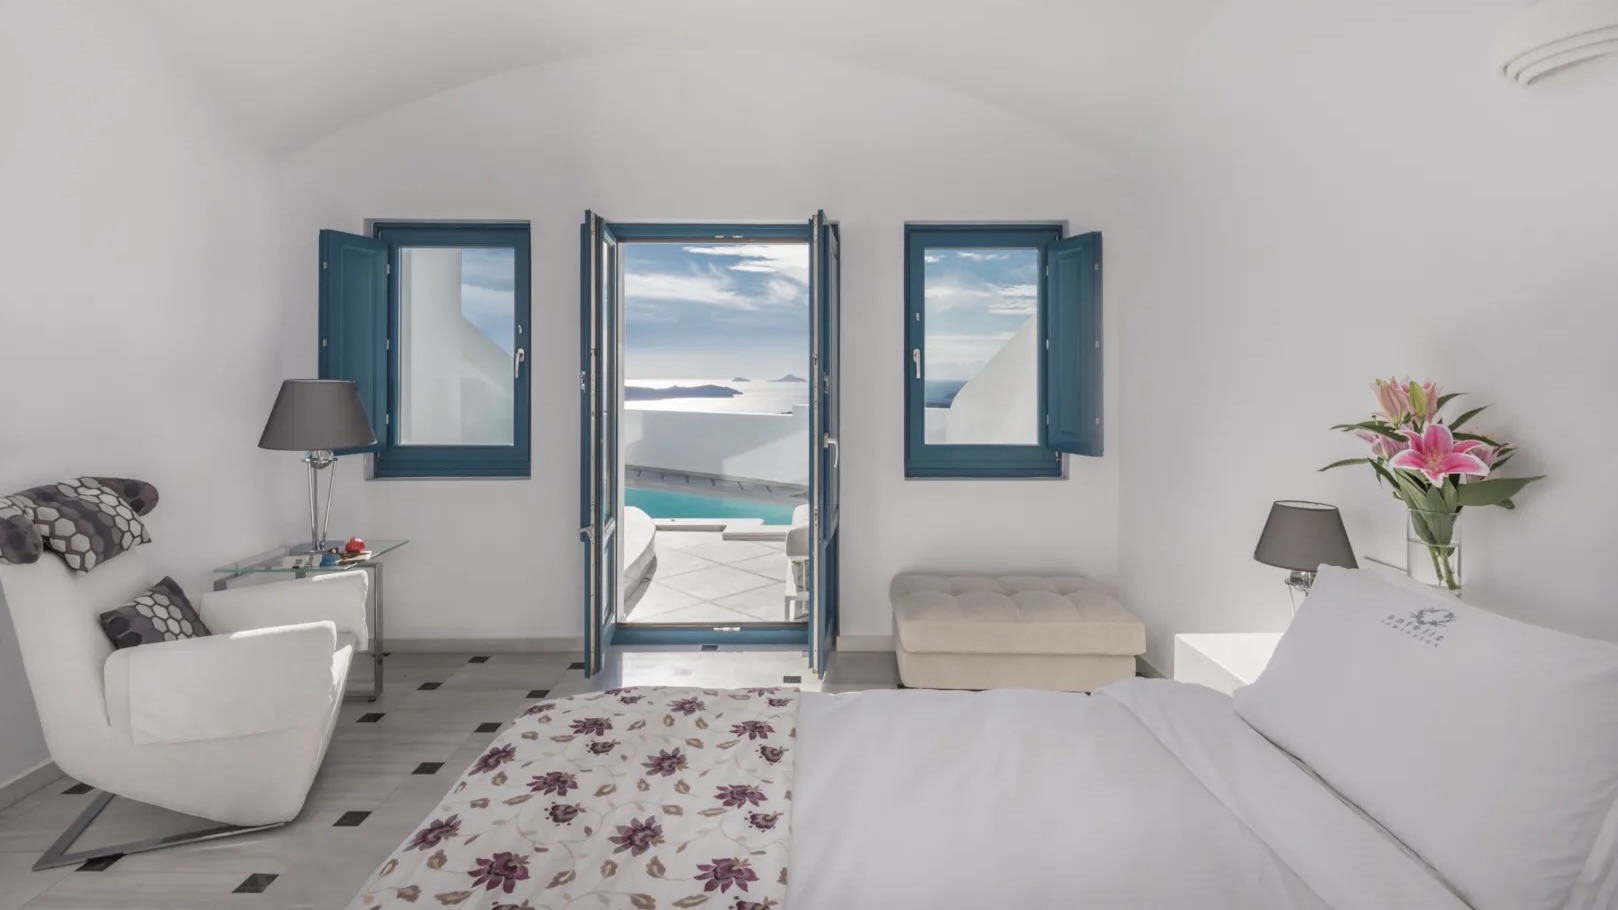 Anteliz Suites cave sute with views at one of the best boutique hotels in Santorini